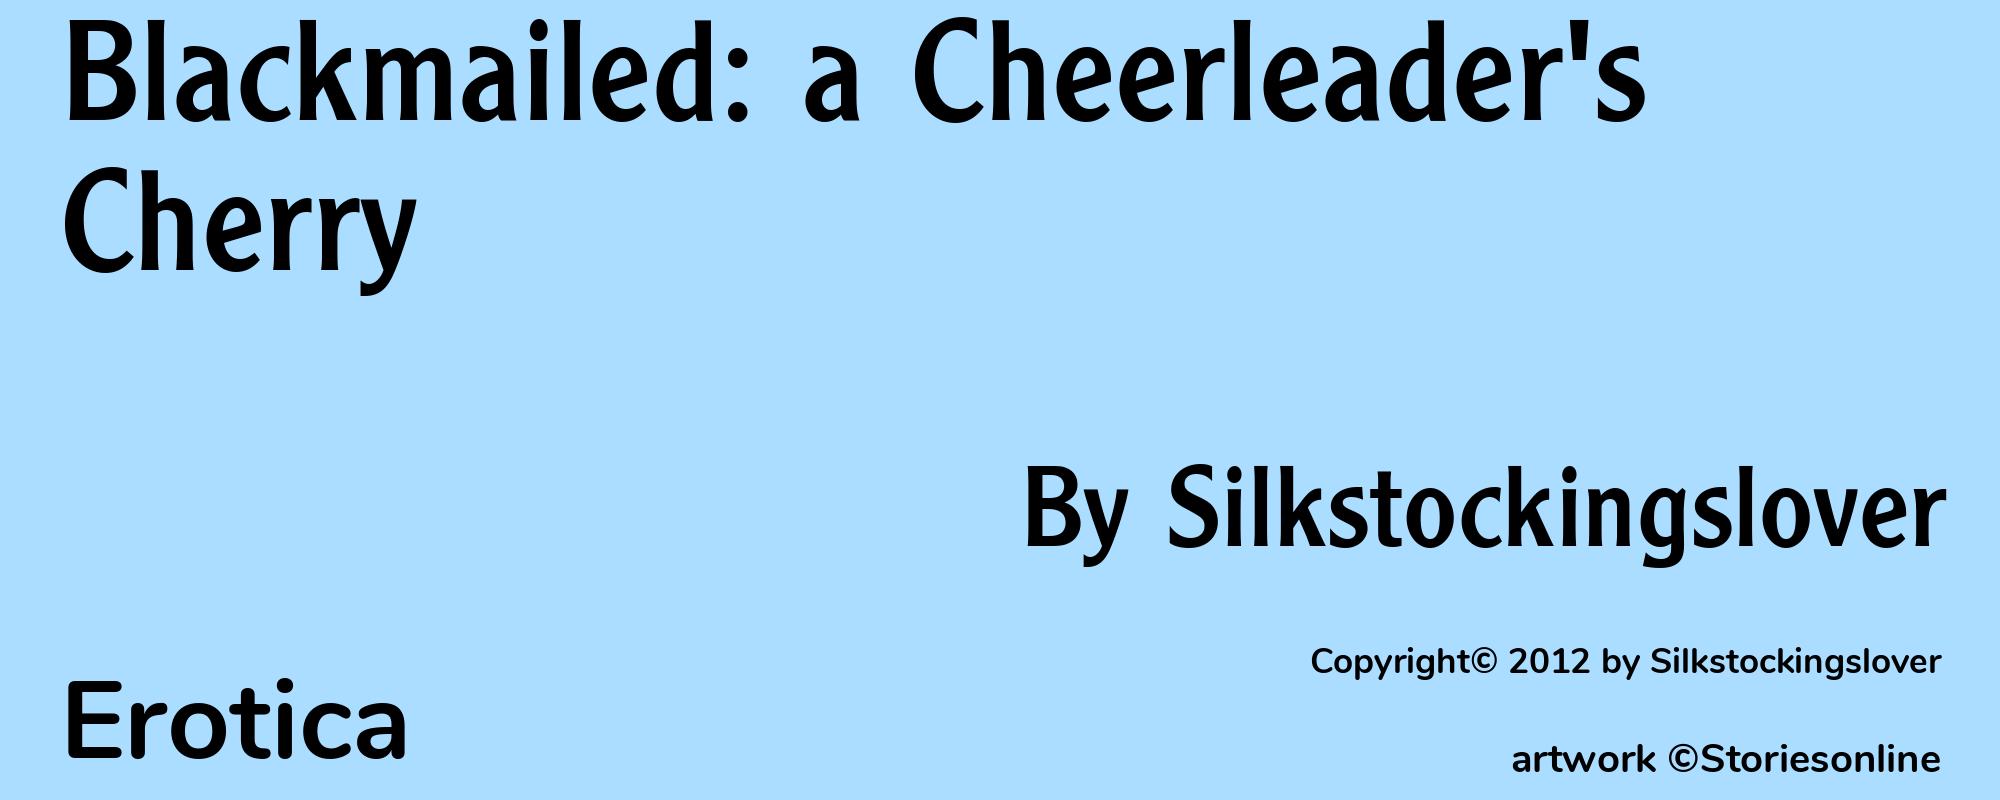 Blackmailed: a Cheerleader's Cherry - Cover